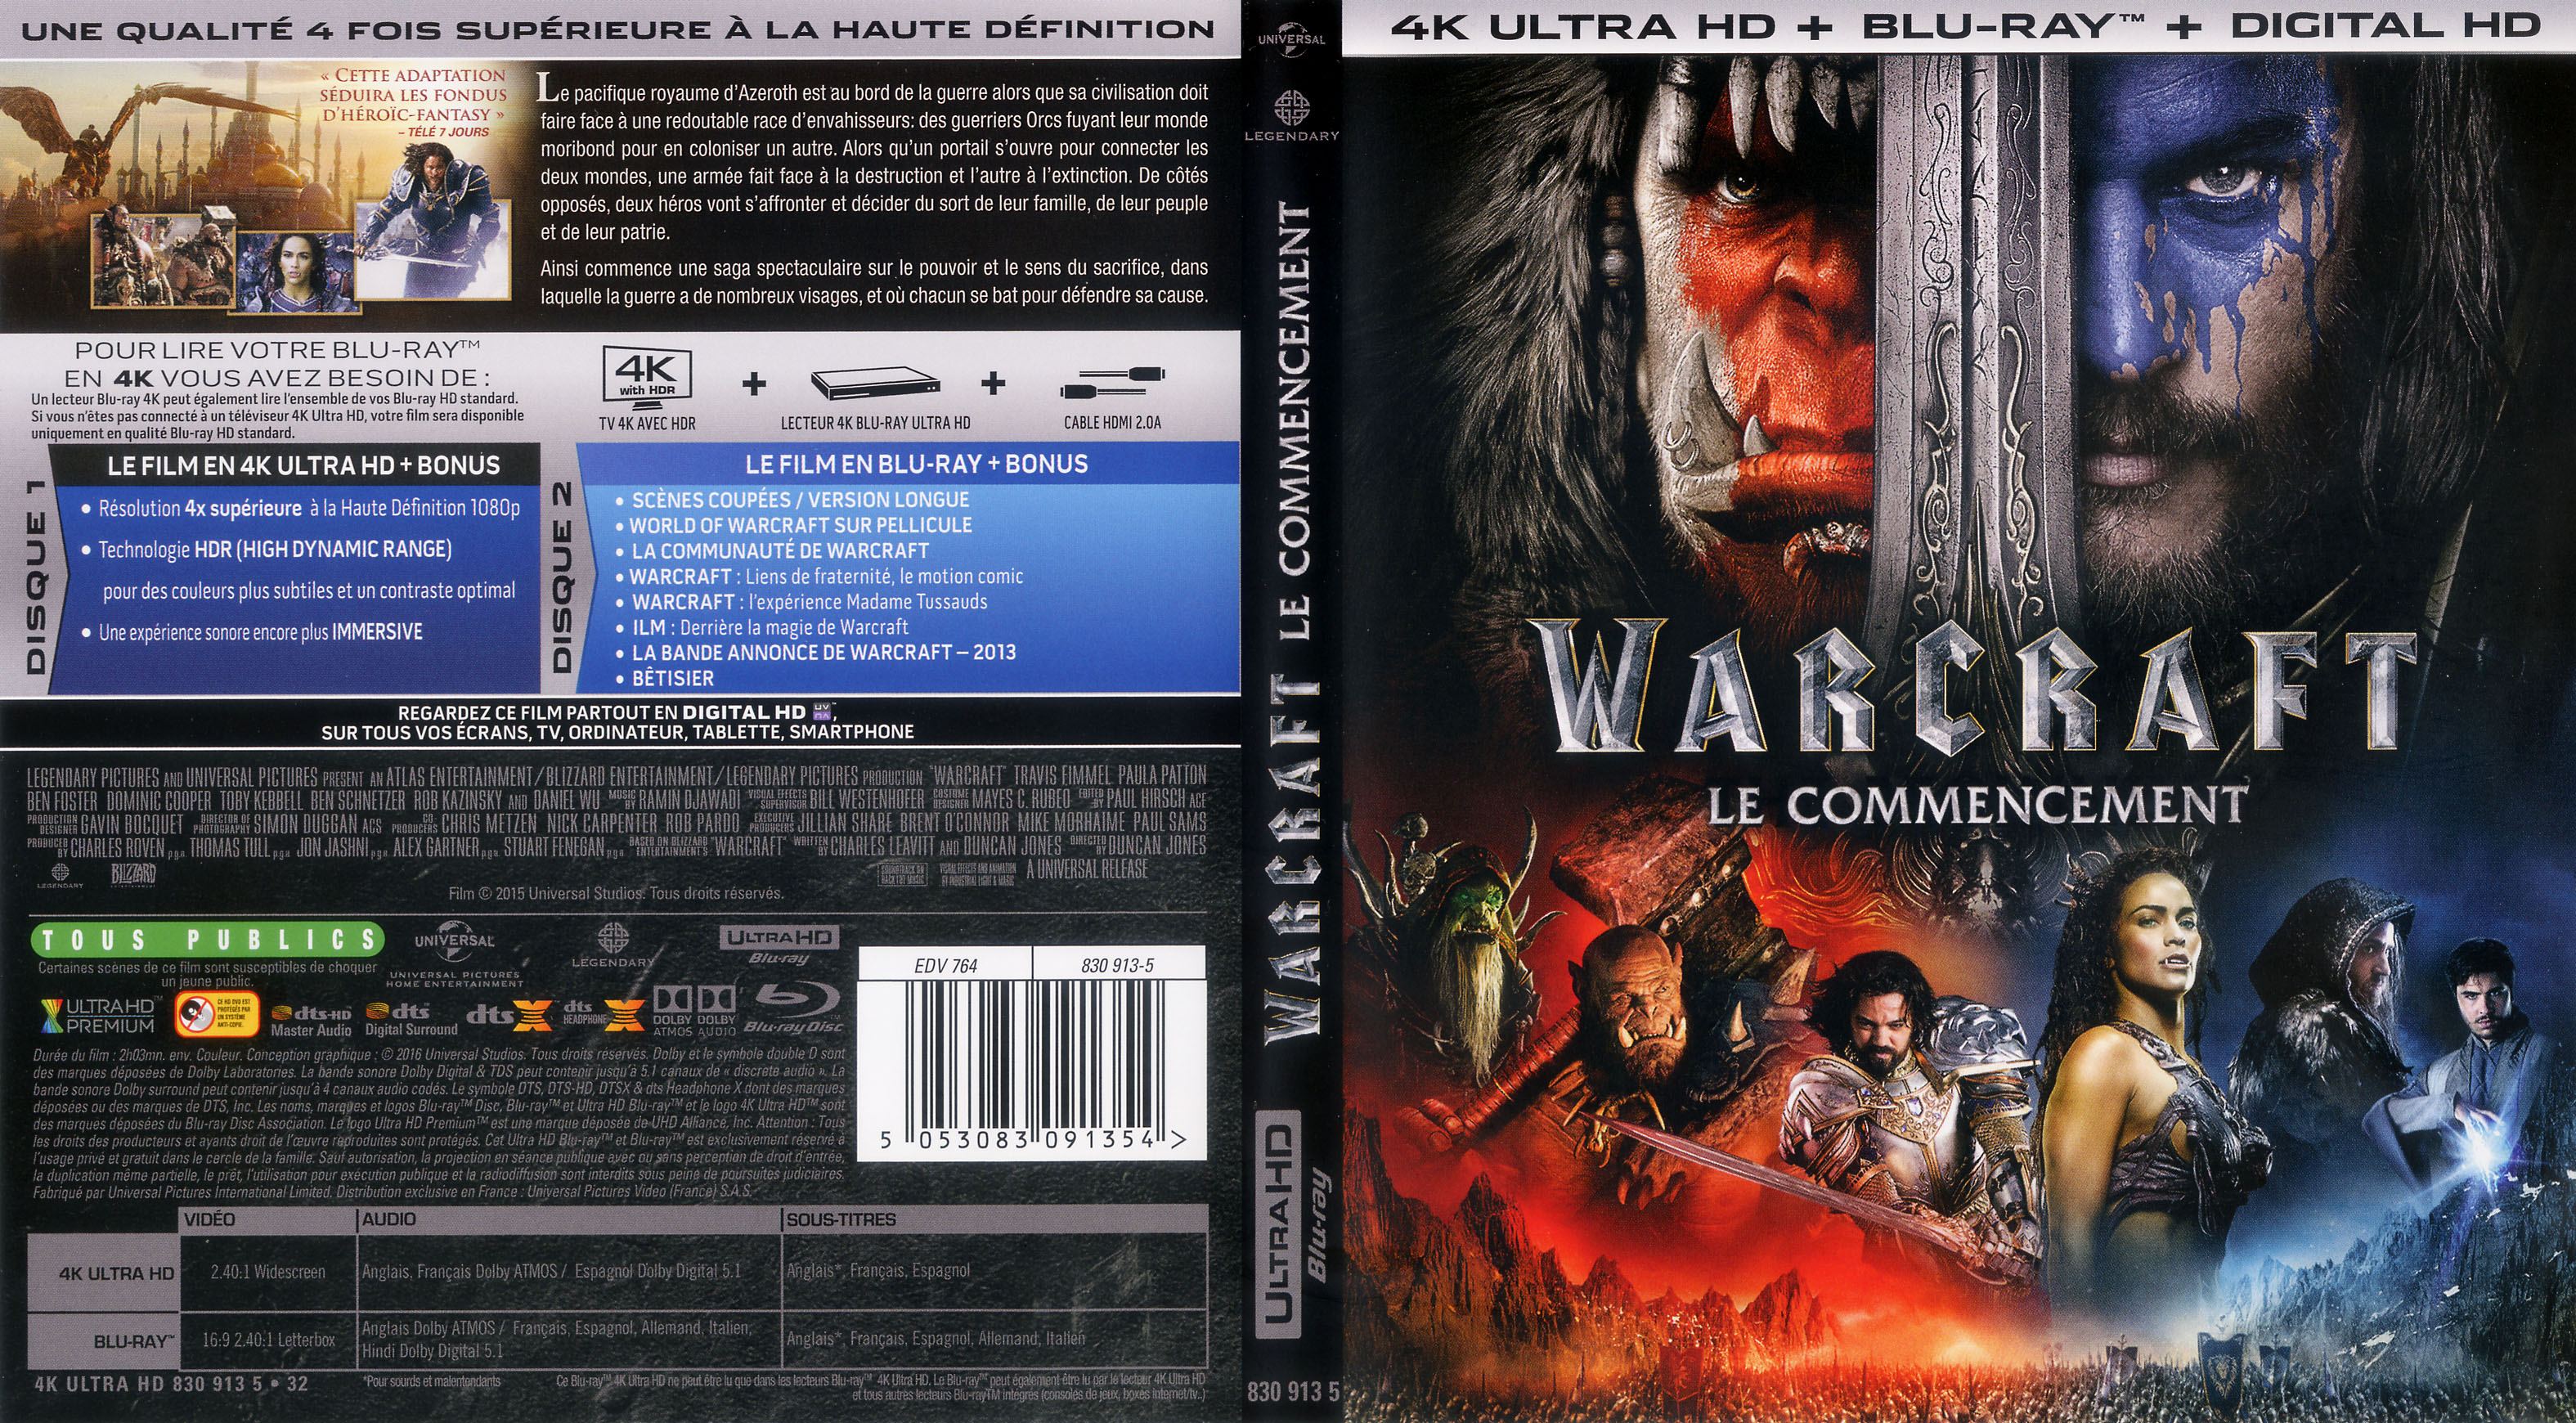 Jaquette DVD Warcraft : Le commencement 4K (BLU-RAY)